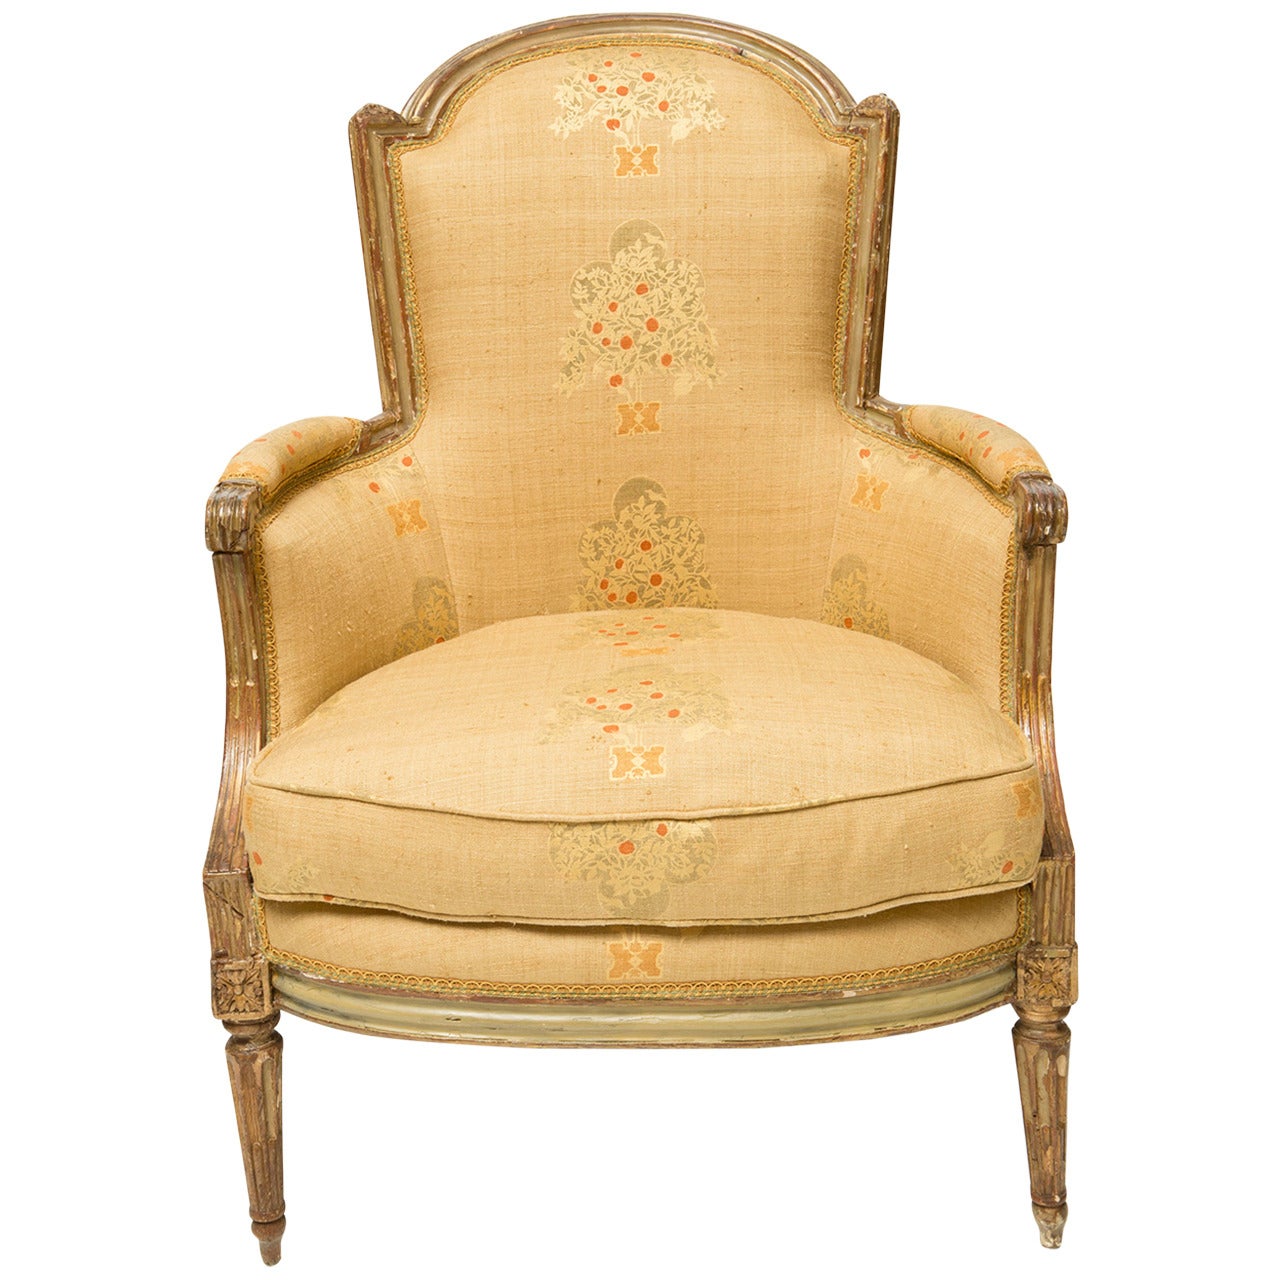 19th Century French Bergere Chair